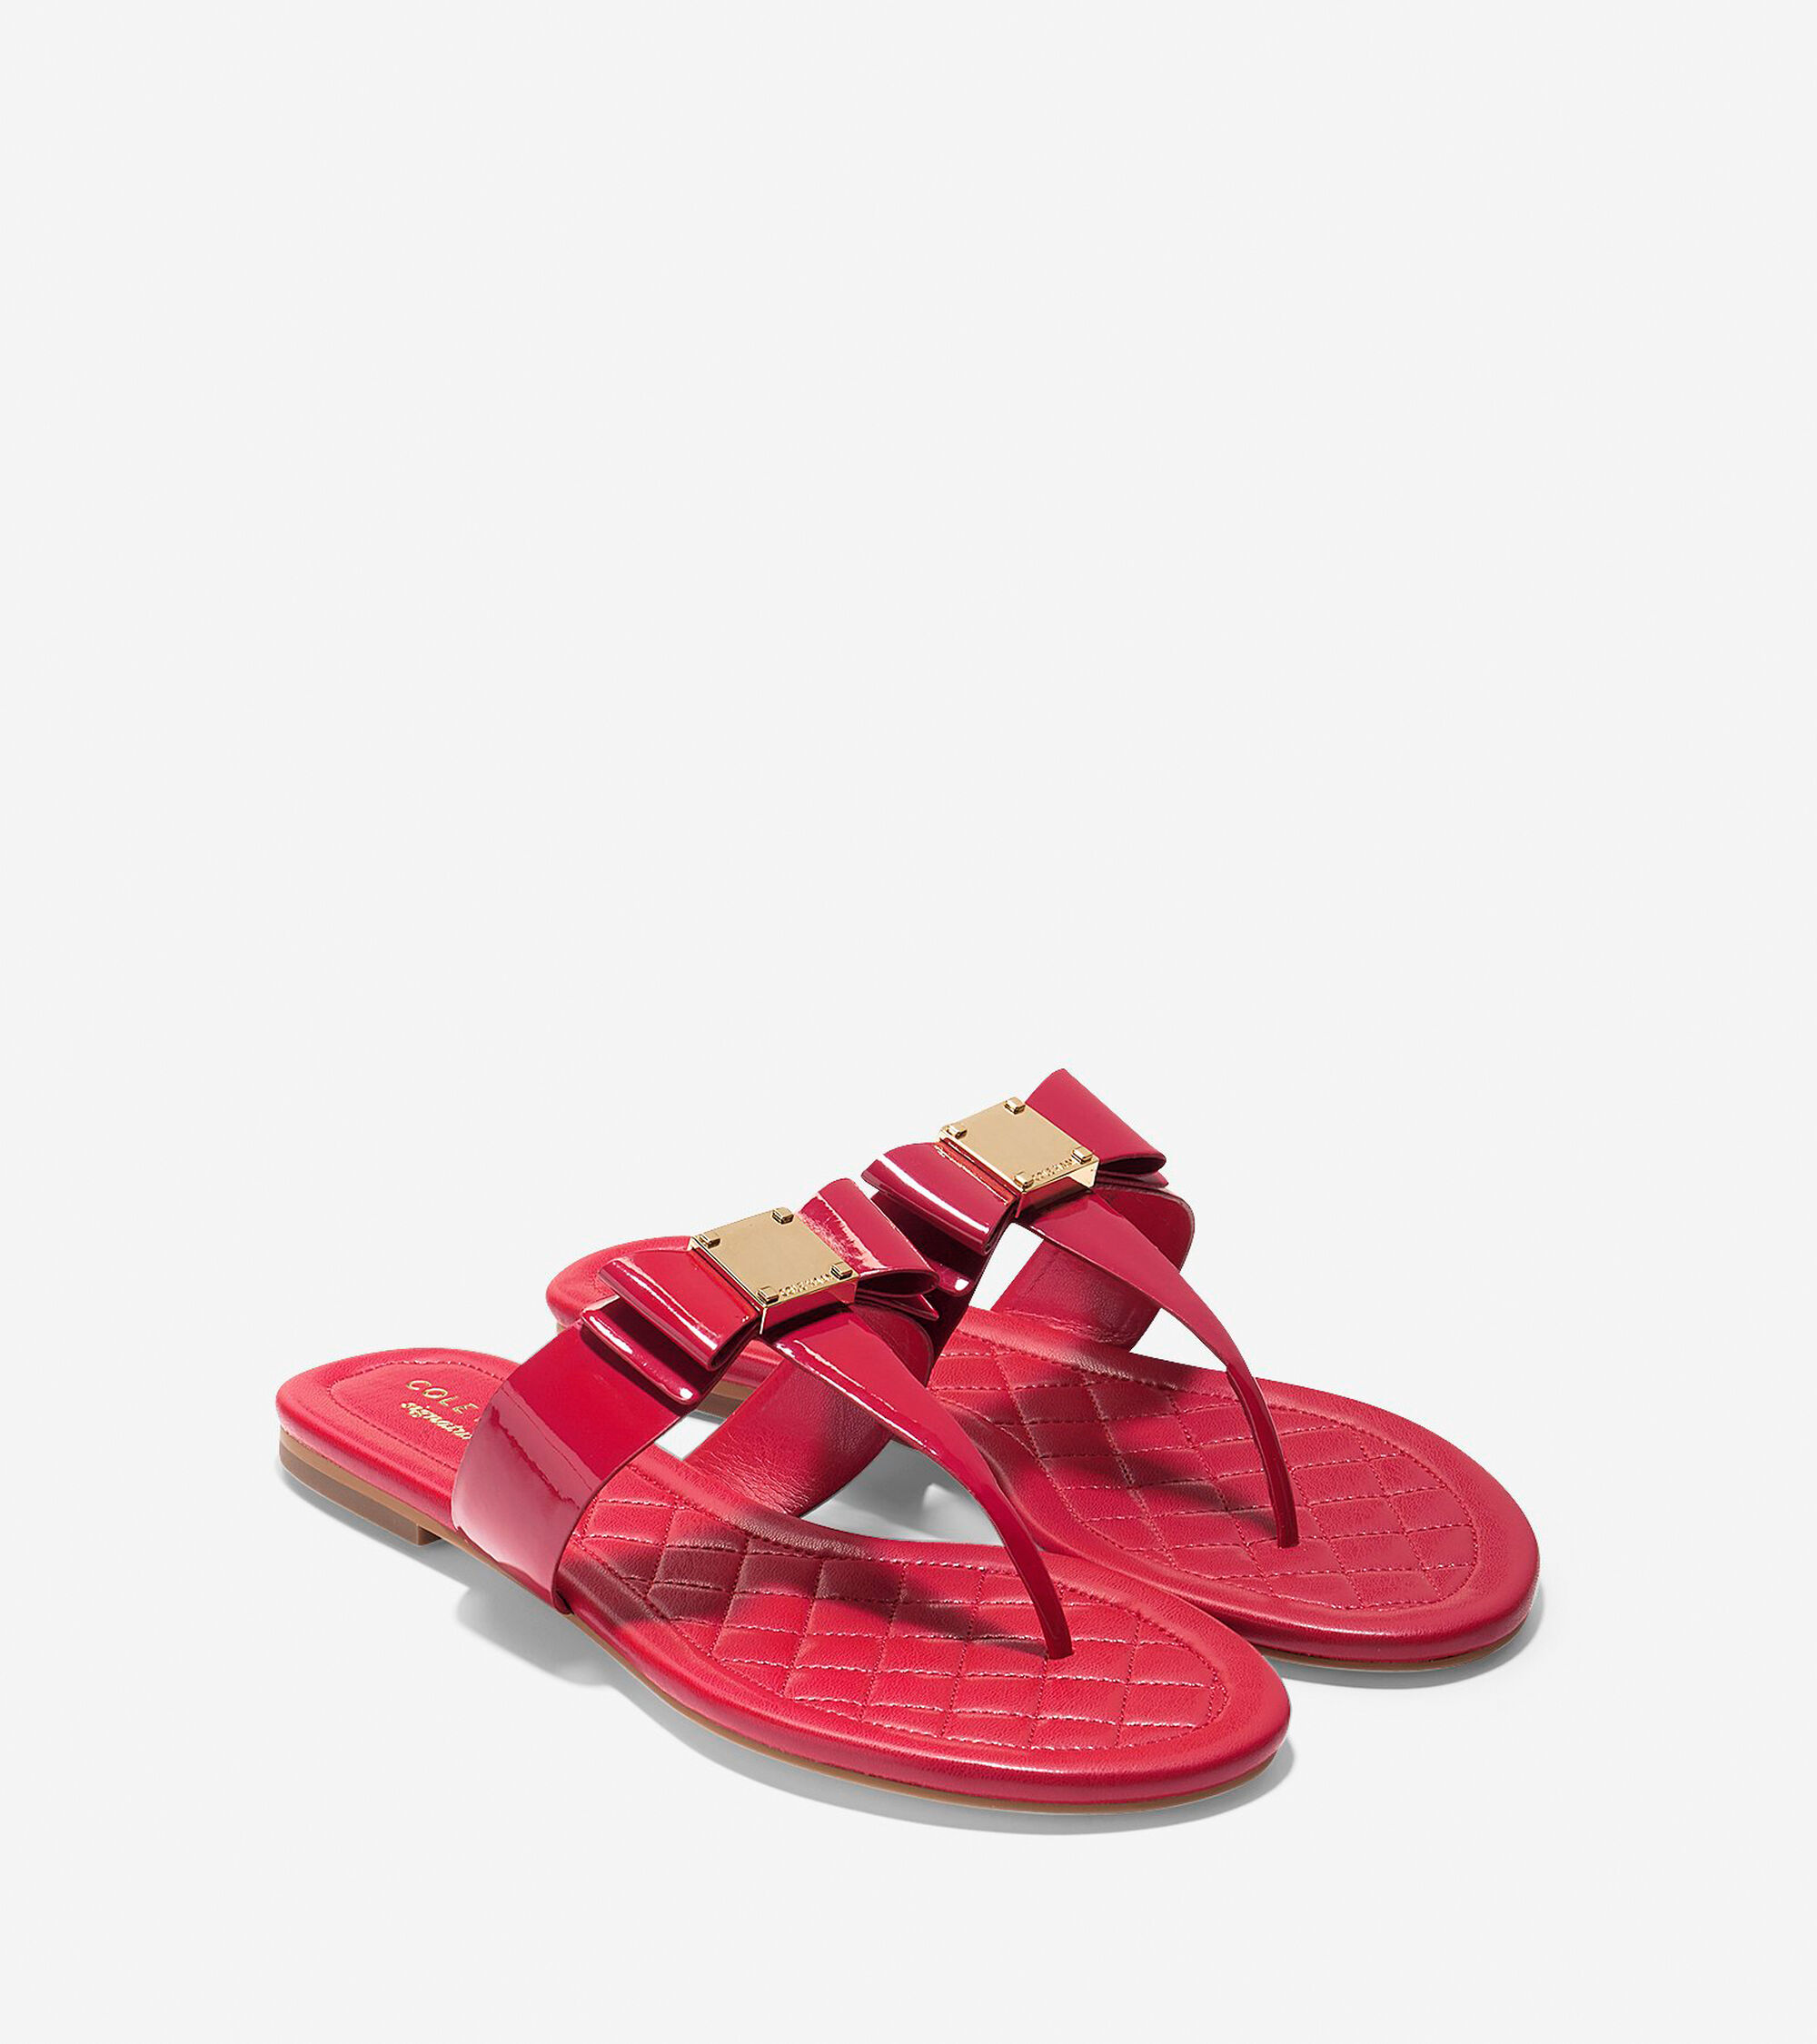 Tali Bow Flat Sandals in Tango Red Patent | Cole Haan